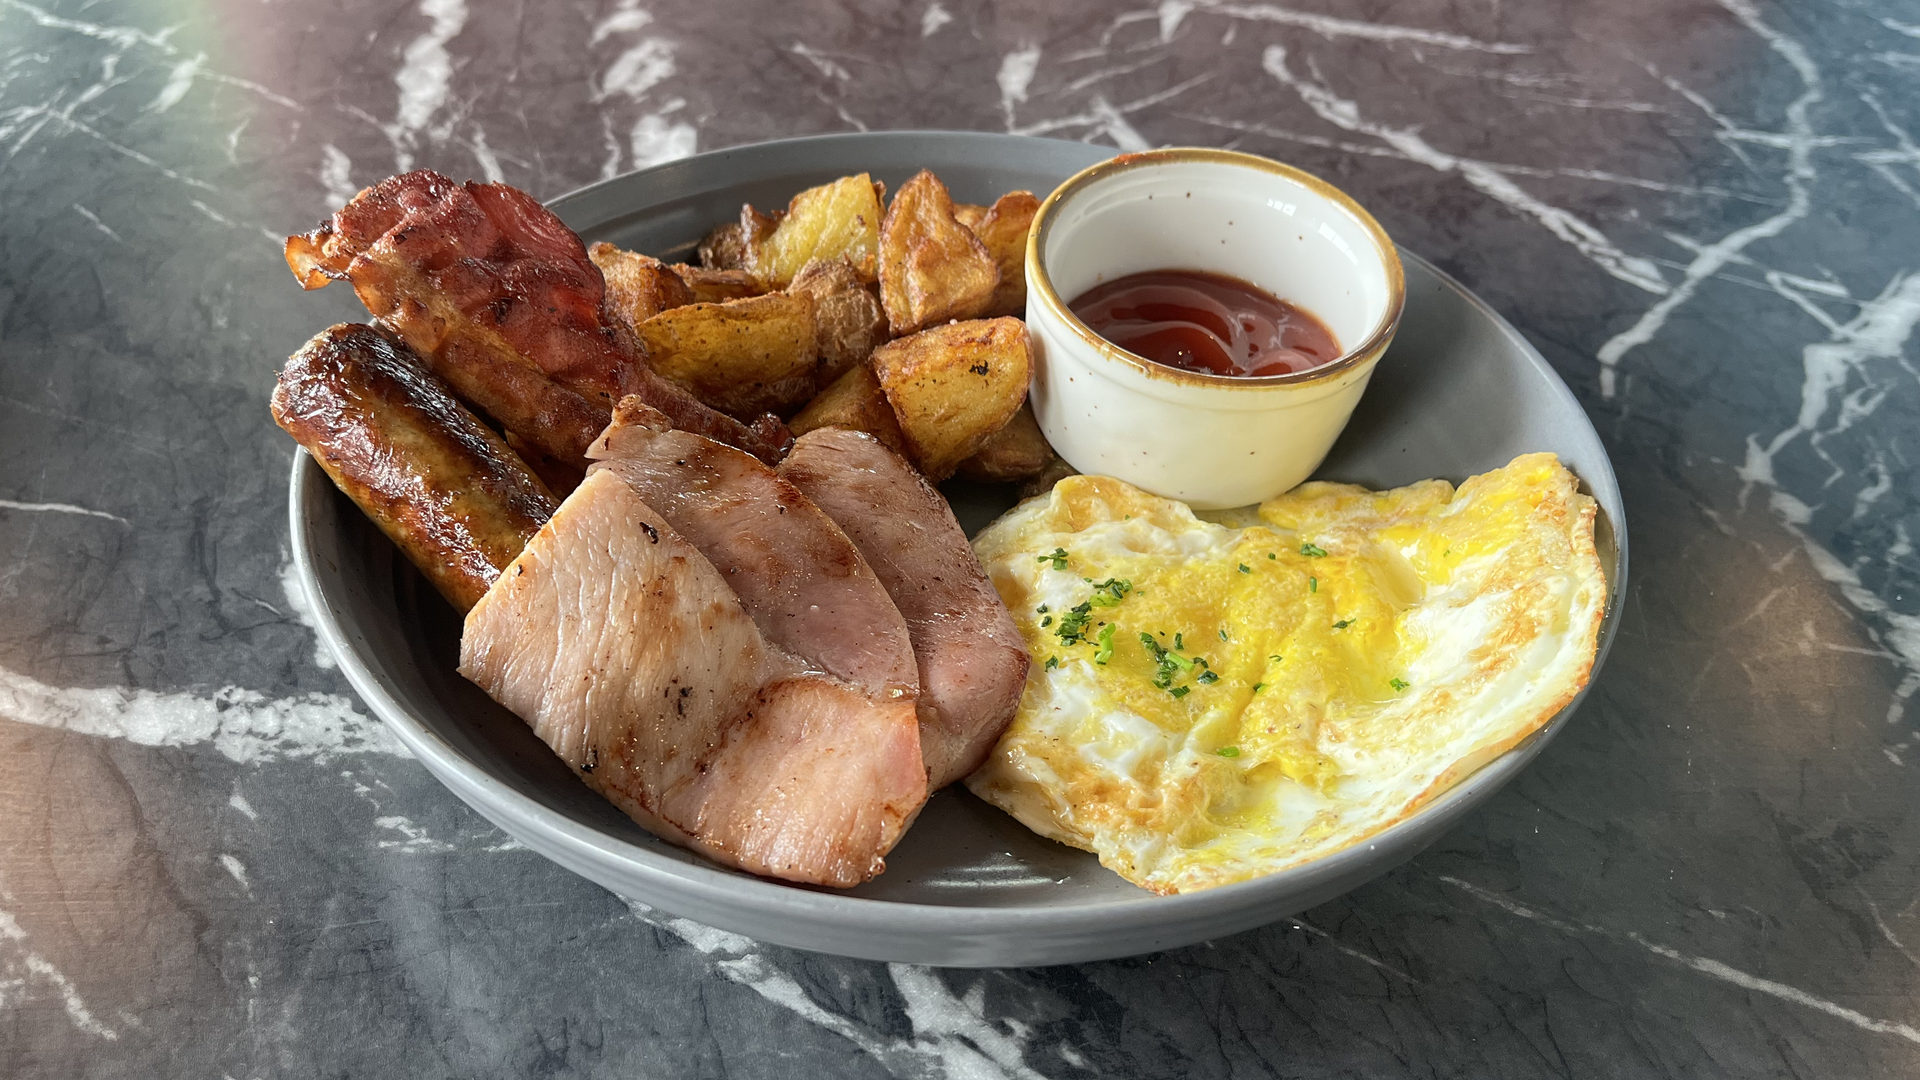 A breakfast plate with eggs, sausage, bacon, ham and potatoes.